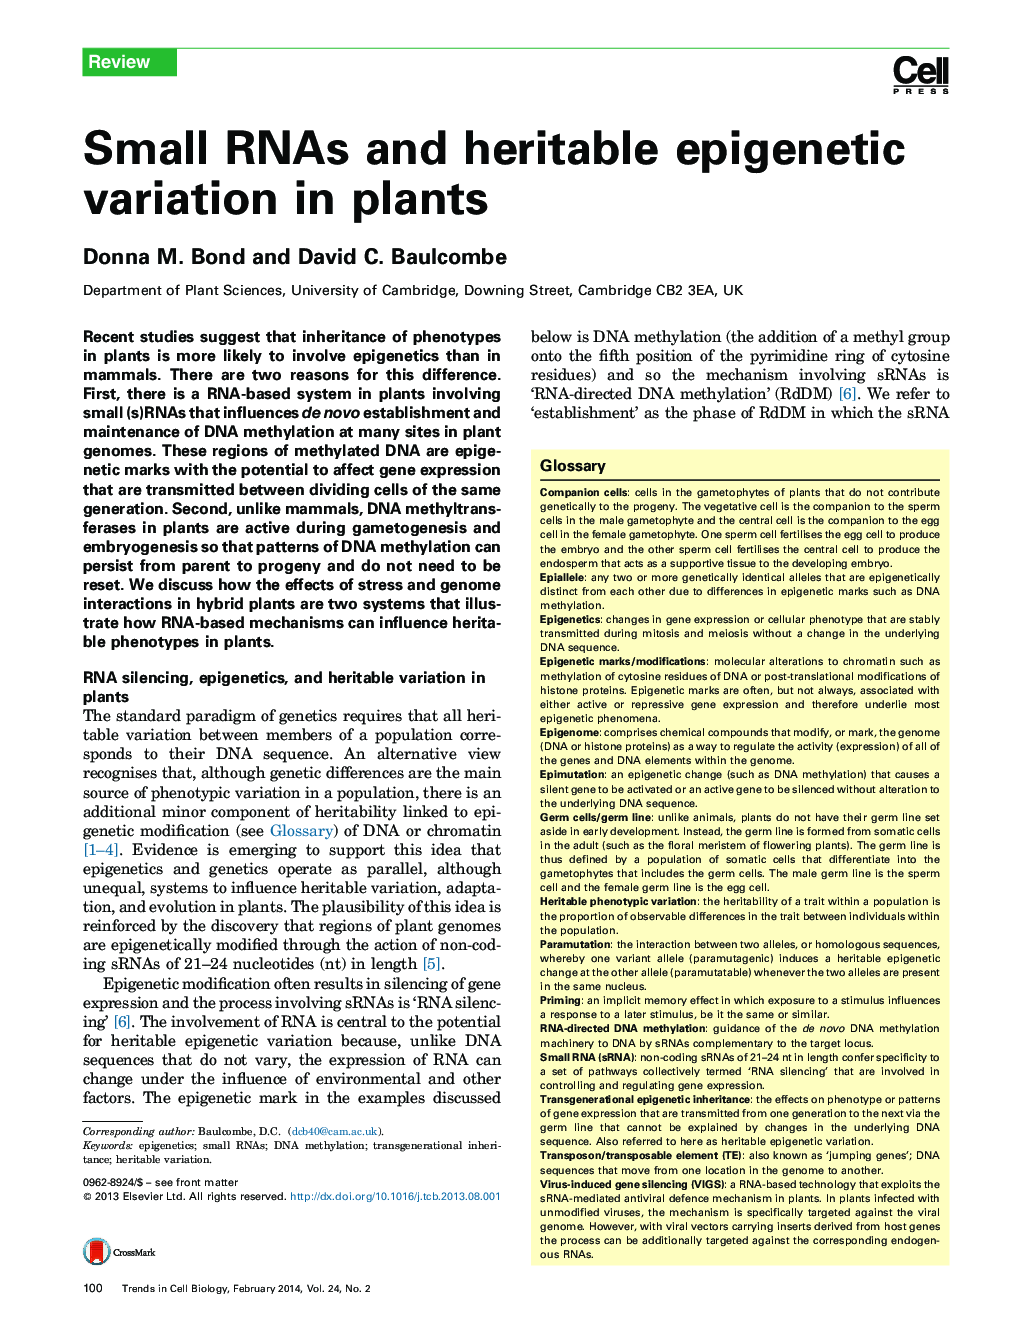 Small RNAs and heritable epigenetic variation in plants